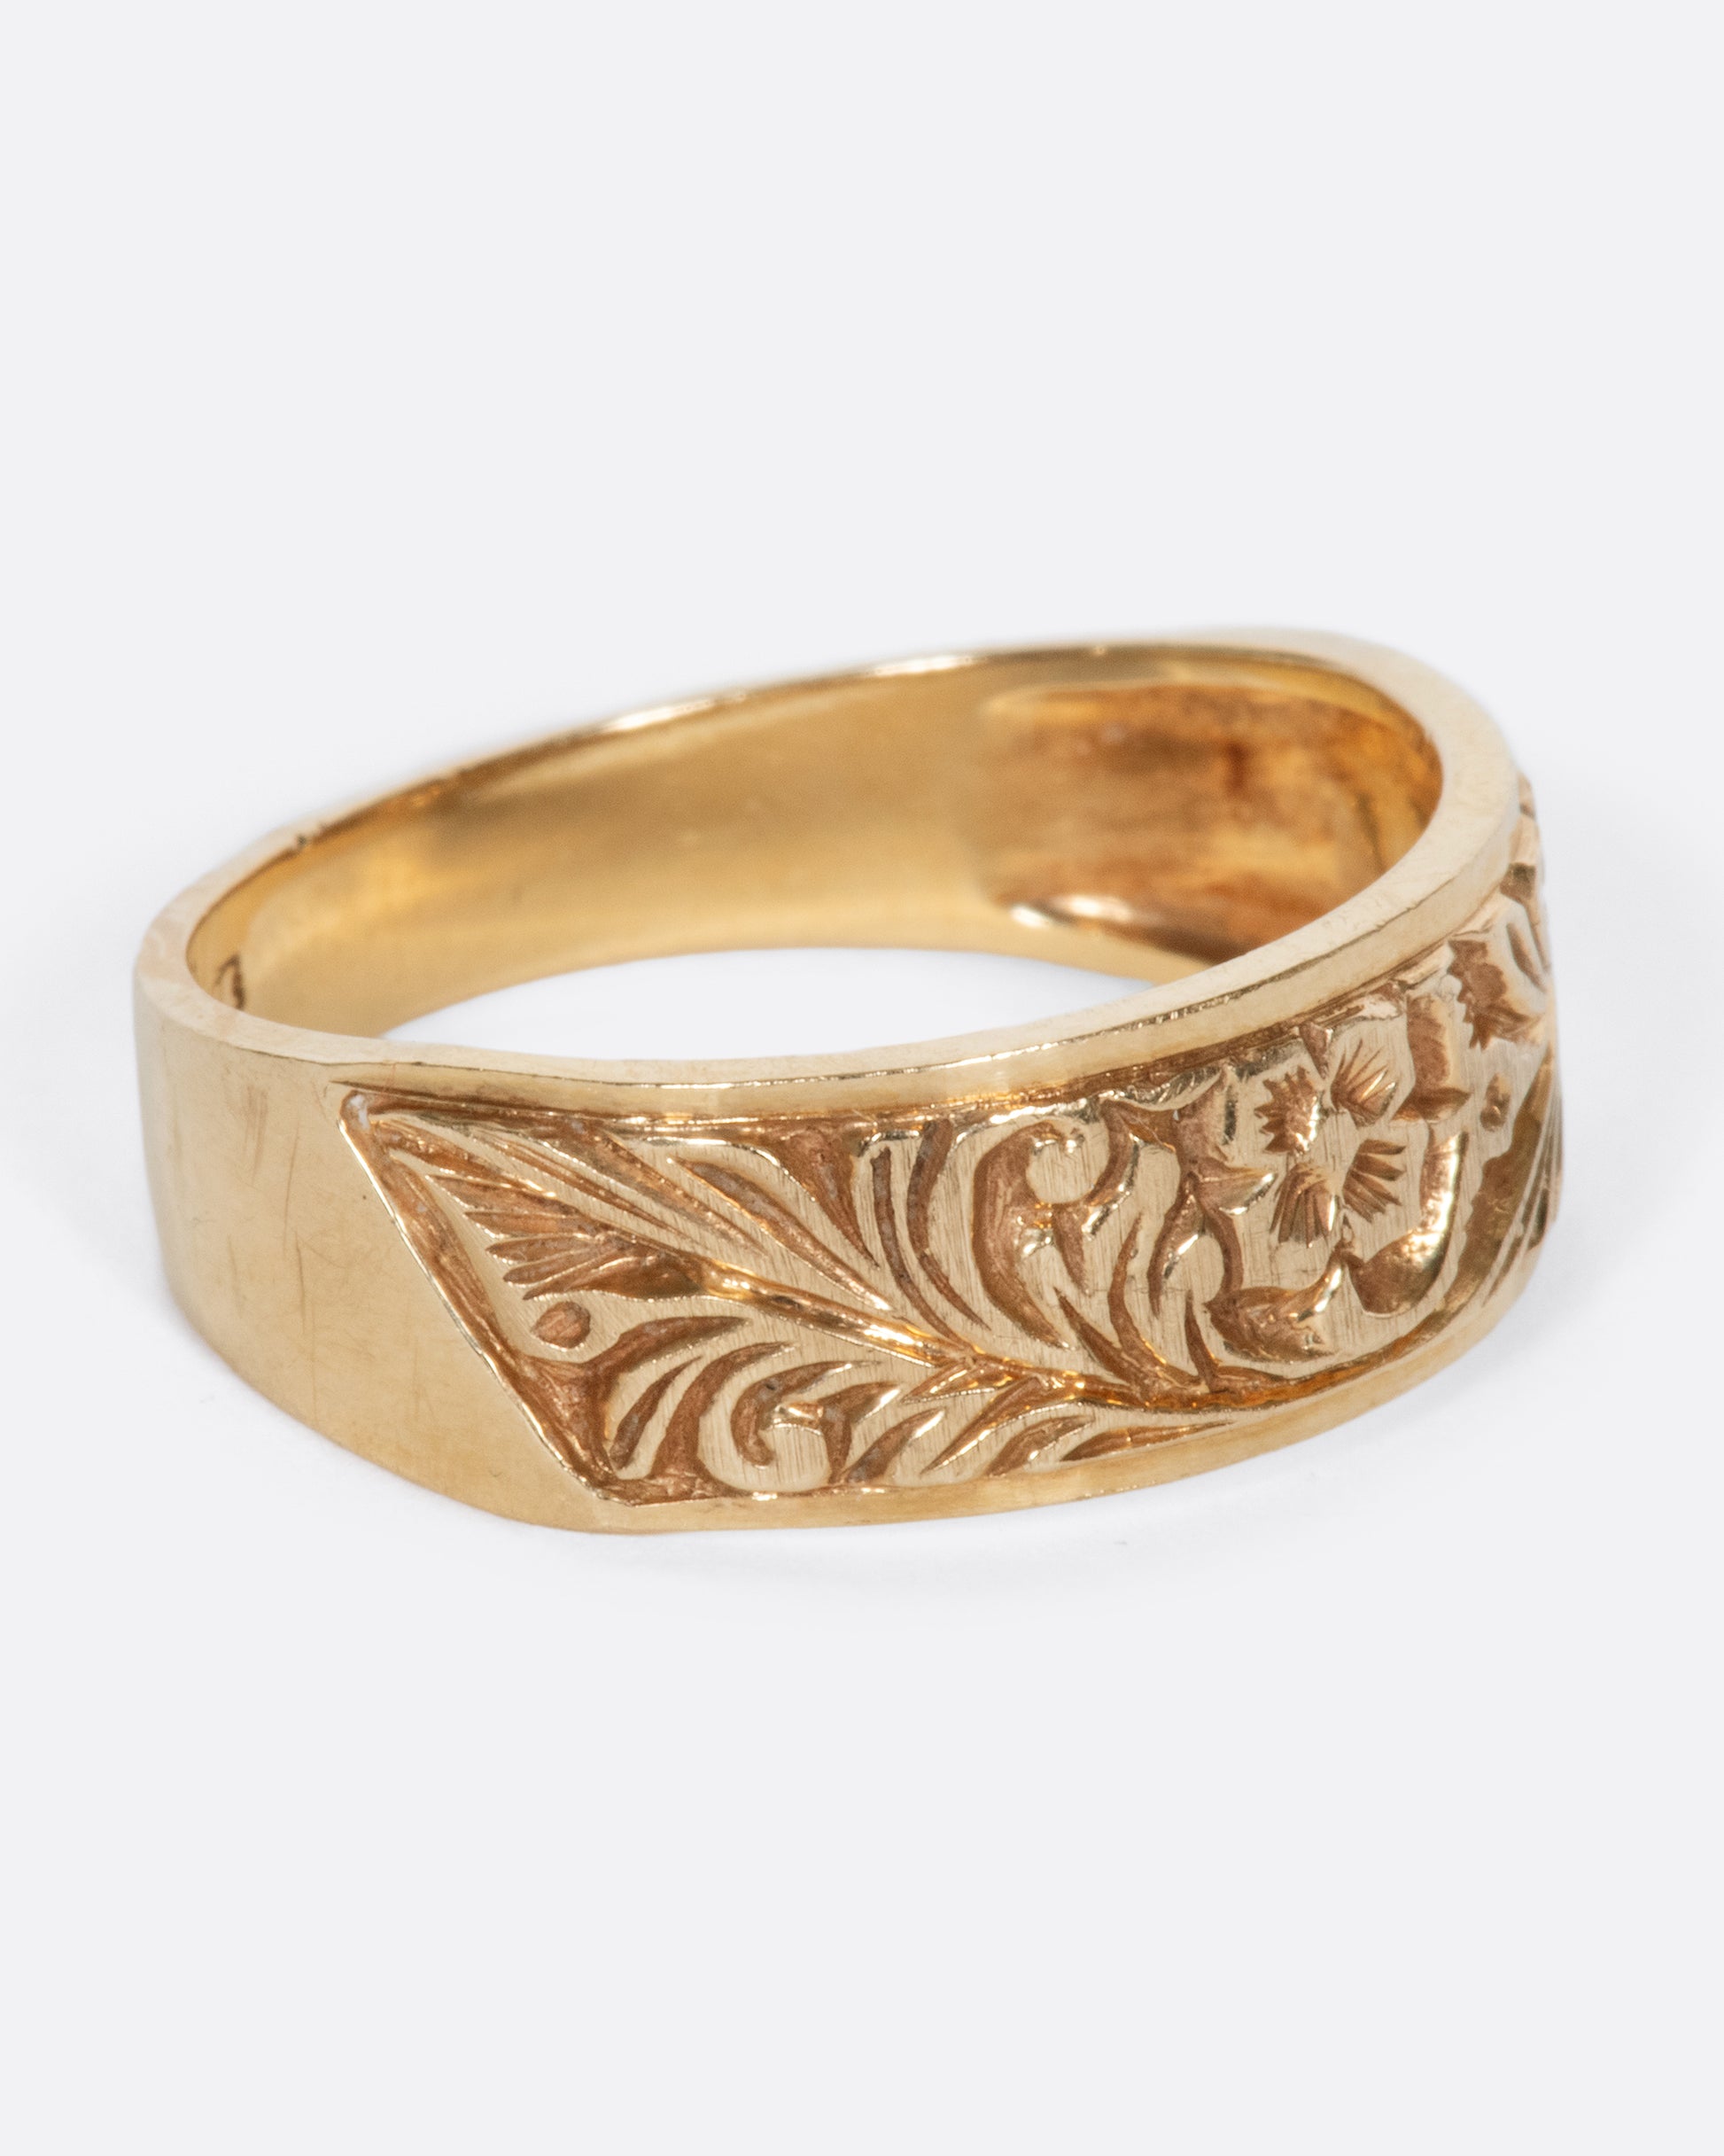 A vintage yellow gold band ring with a flower and leaves carved into the front half of it.